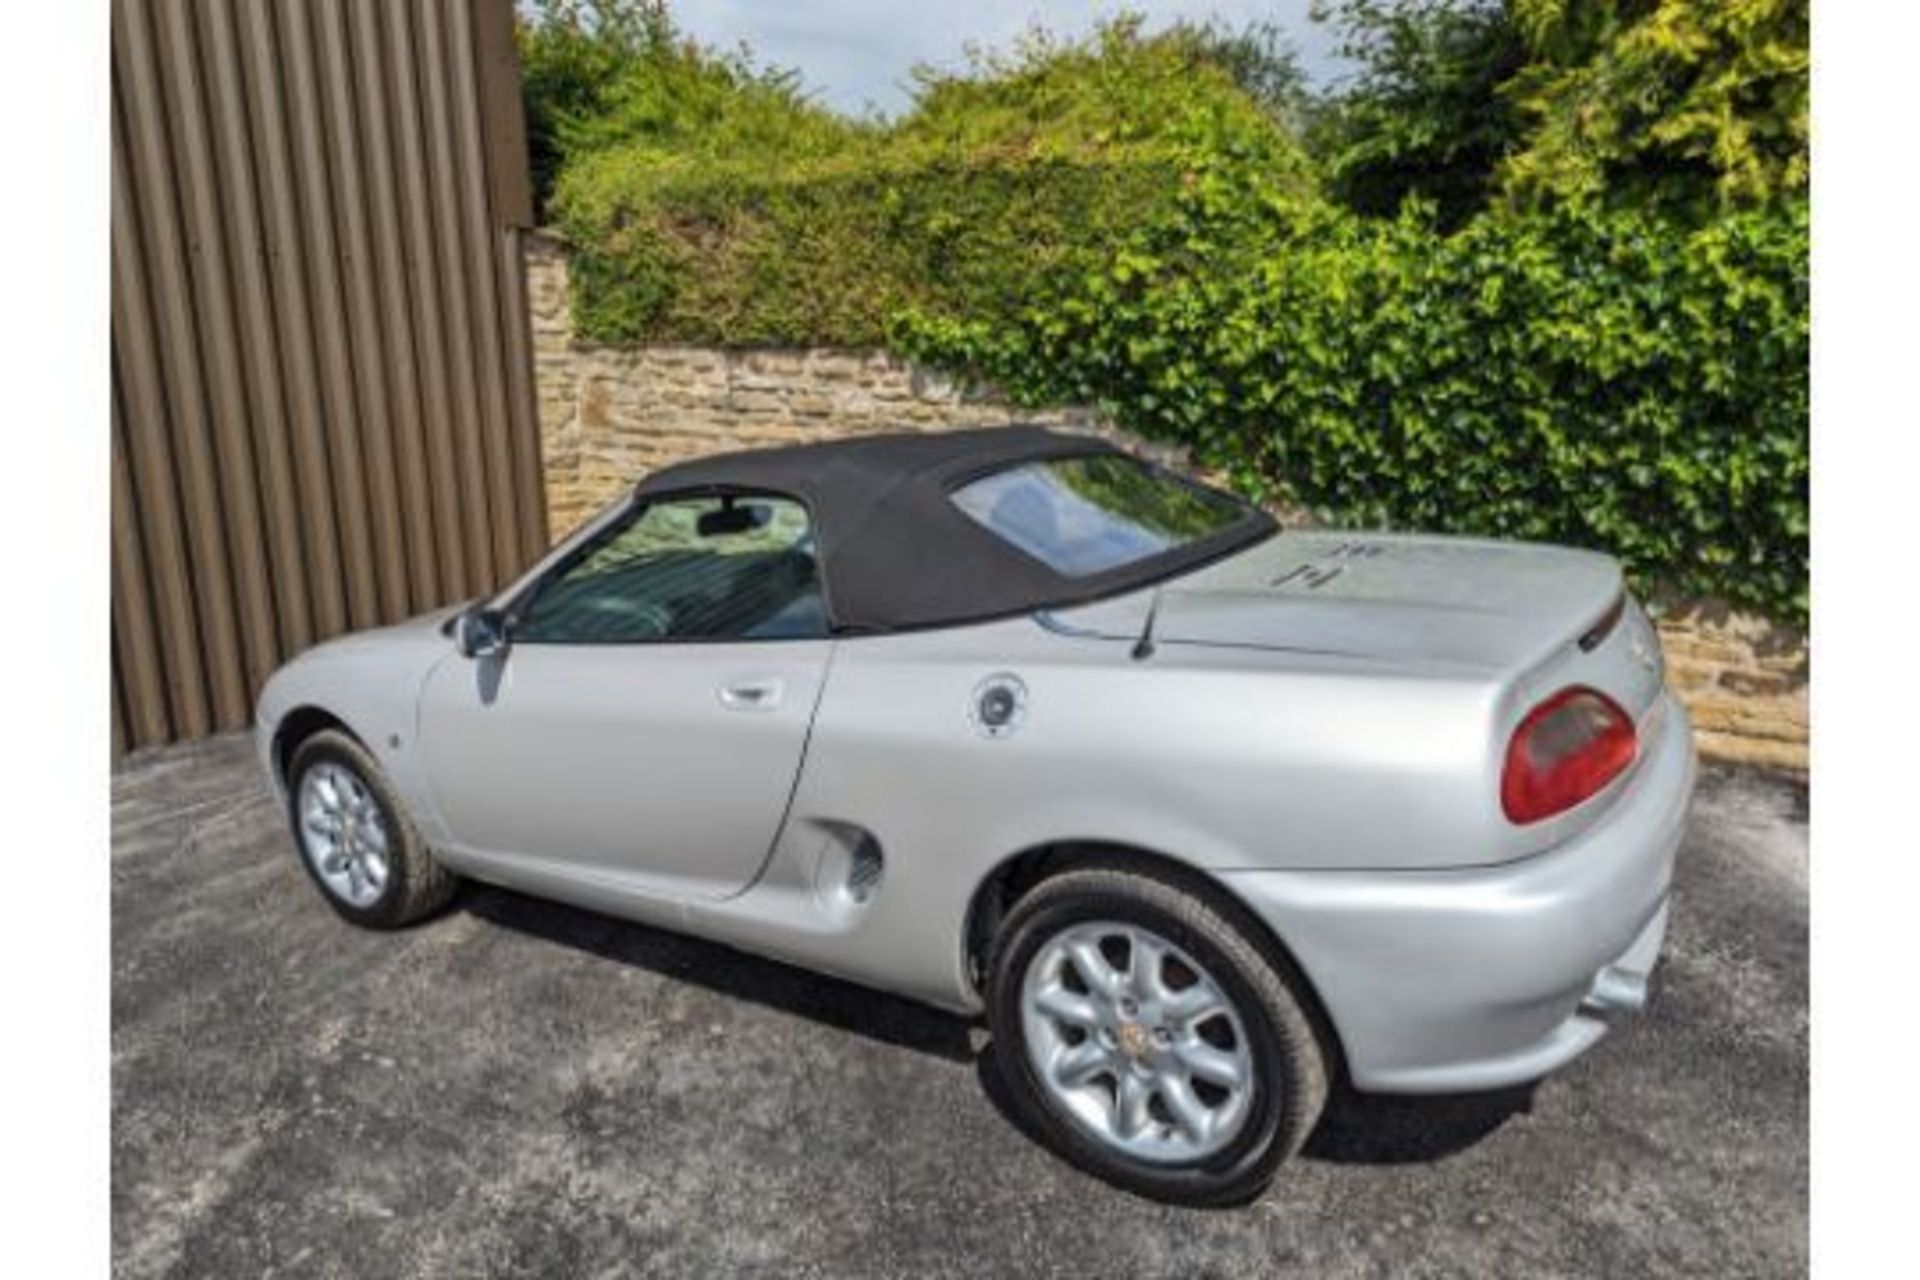 MG MGF Convertible Silver Registered Year 2000 (W Reg) 97545 Miles 1.8L, - Image 9 of 11